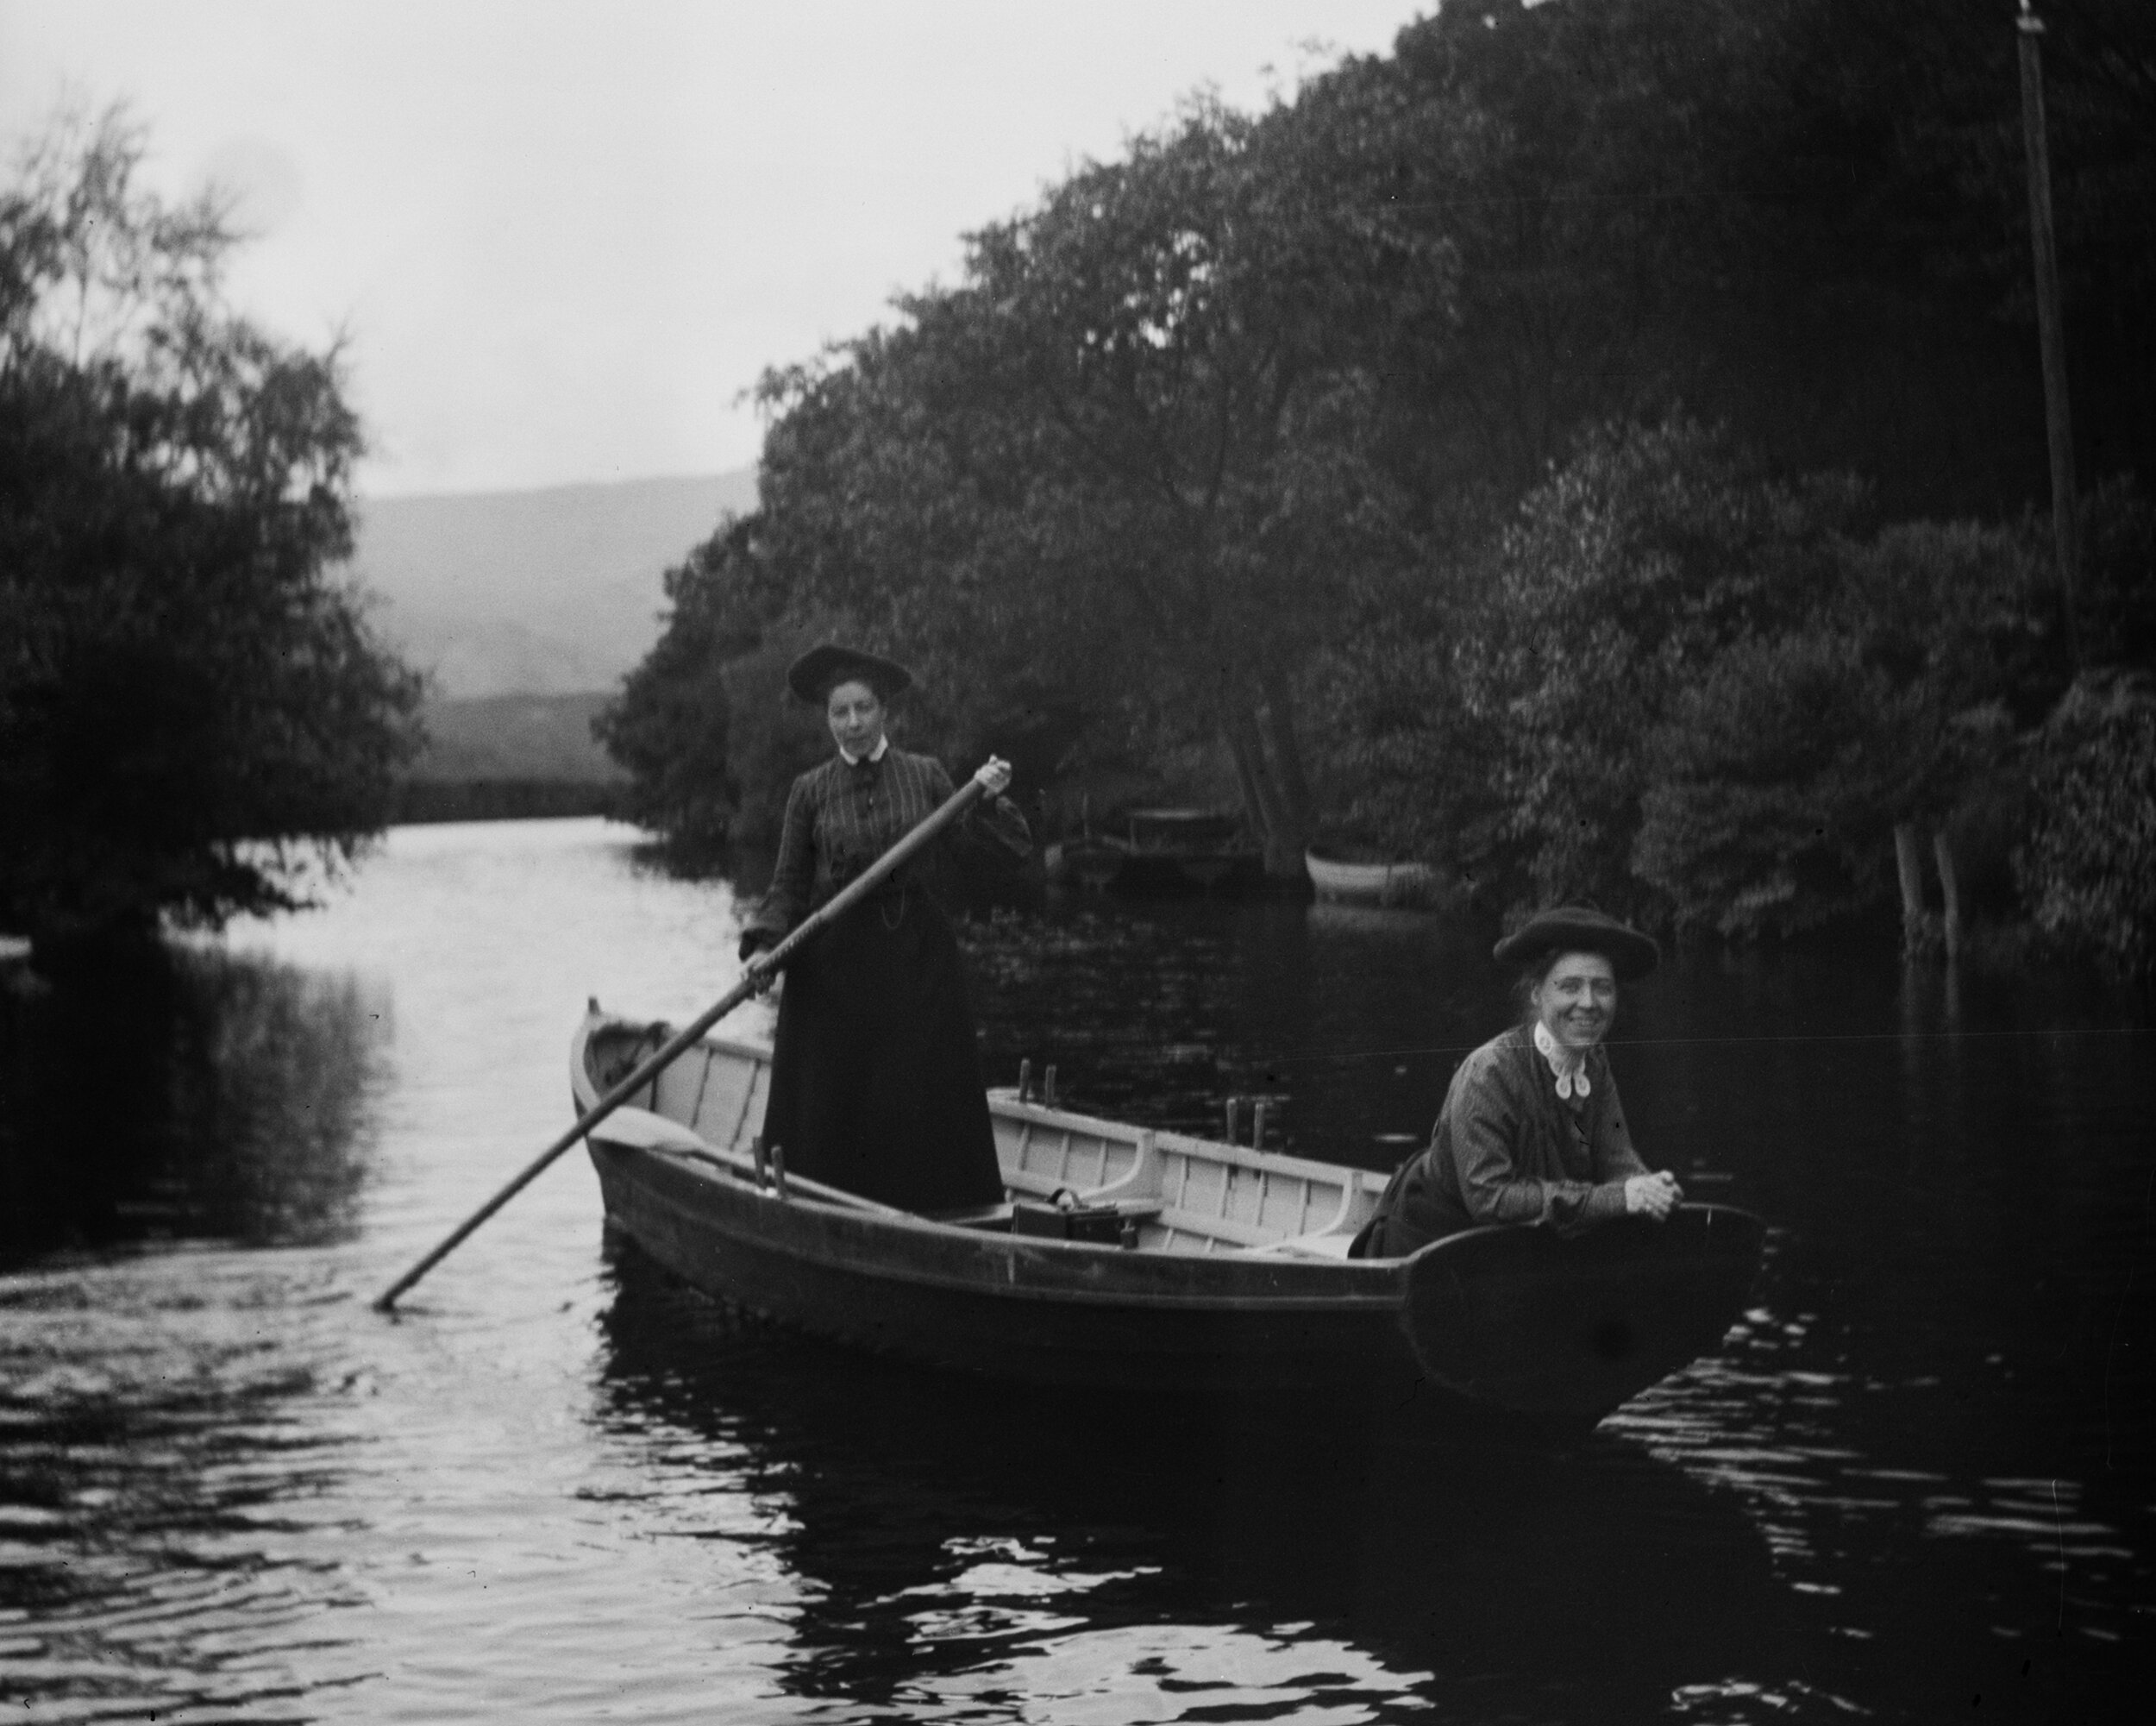   [Alice Austen and Gertrude Tate in a rowboat, The Trossachs, Scotland] 1903  Collection of Historic Richmond Town, 50.015.3562 